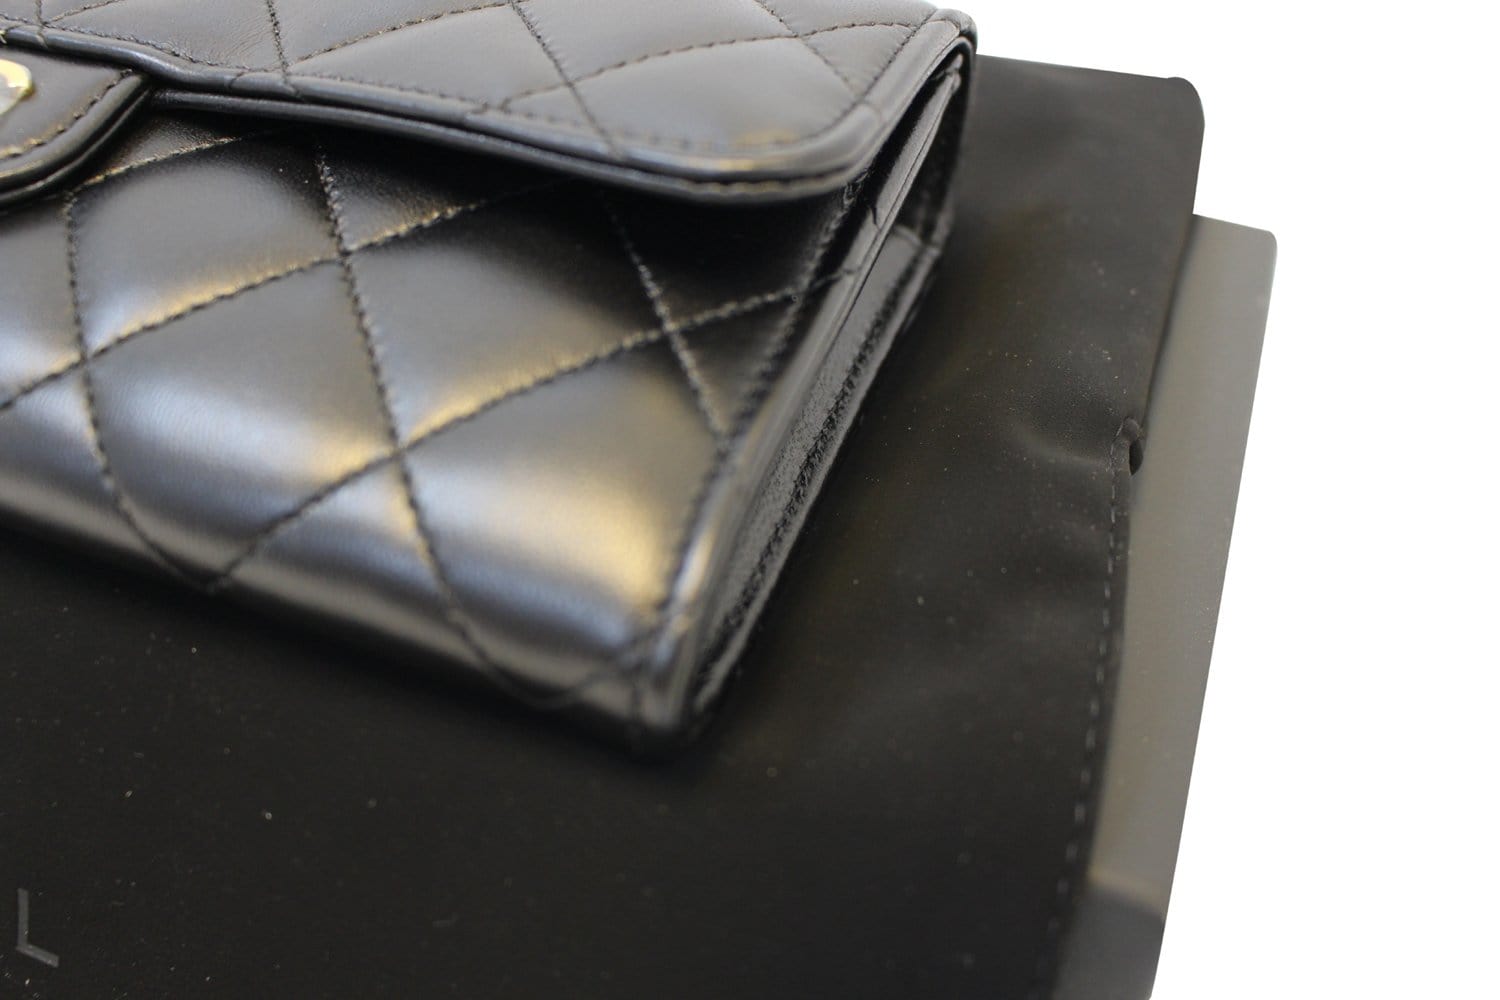 CHANEL Wallet Leather Black Quilted Lambskin Long Flap